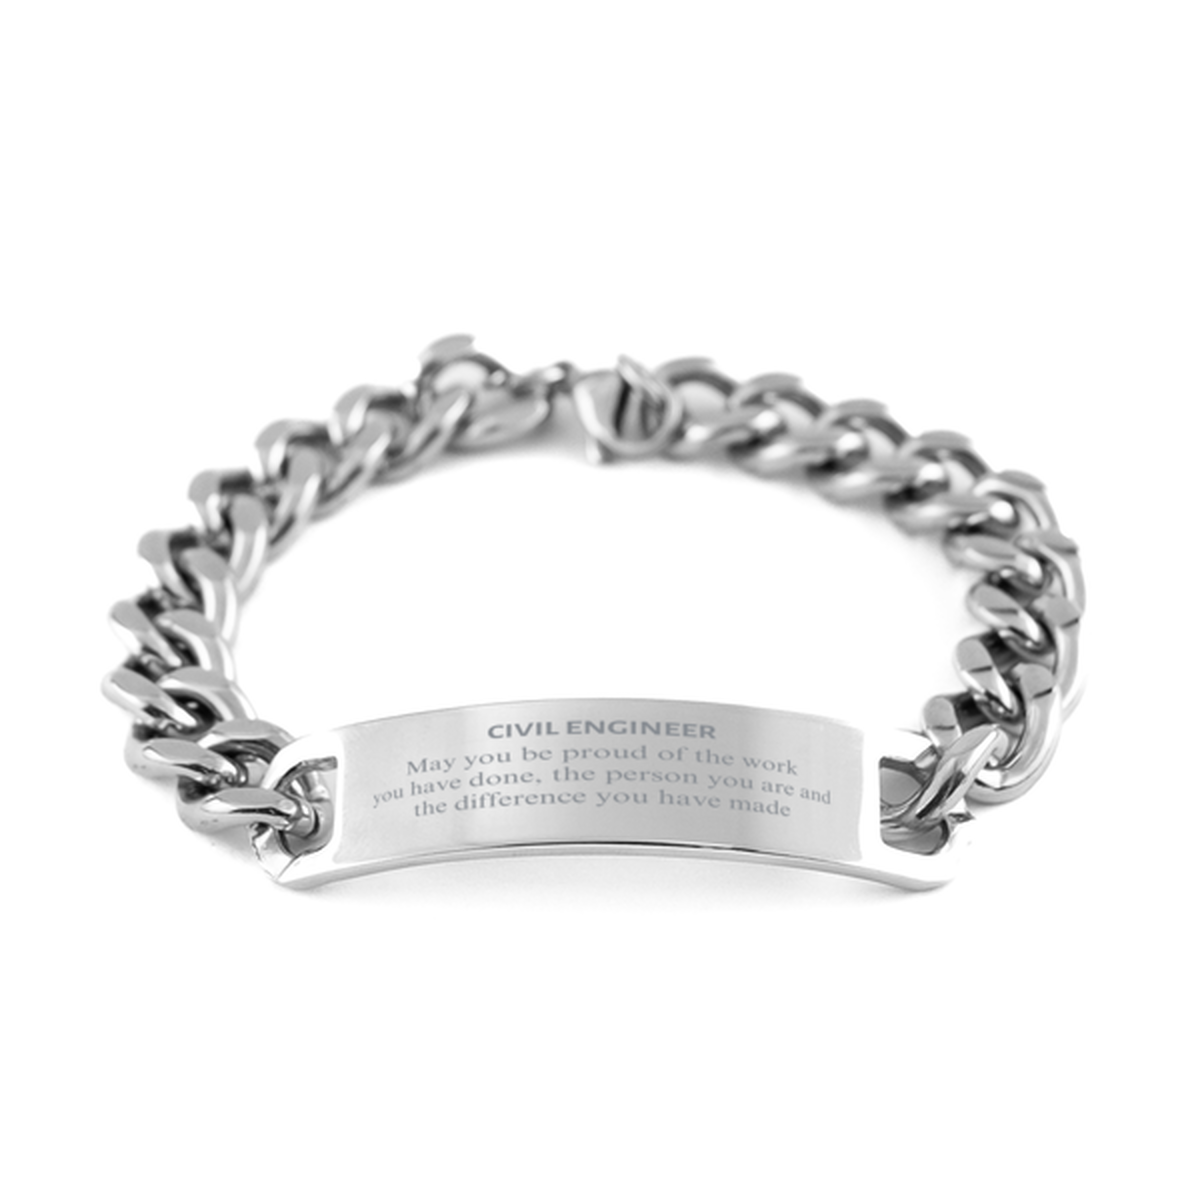 Civil Engineer May you be proud of the work you have done, Retirement Civil Engineer Cuban Chain Stainless Steel Bracelet for Colleague Appreciation Gifts Amazing for Civil Engineer